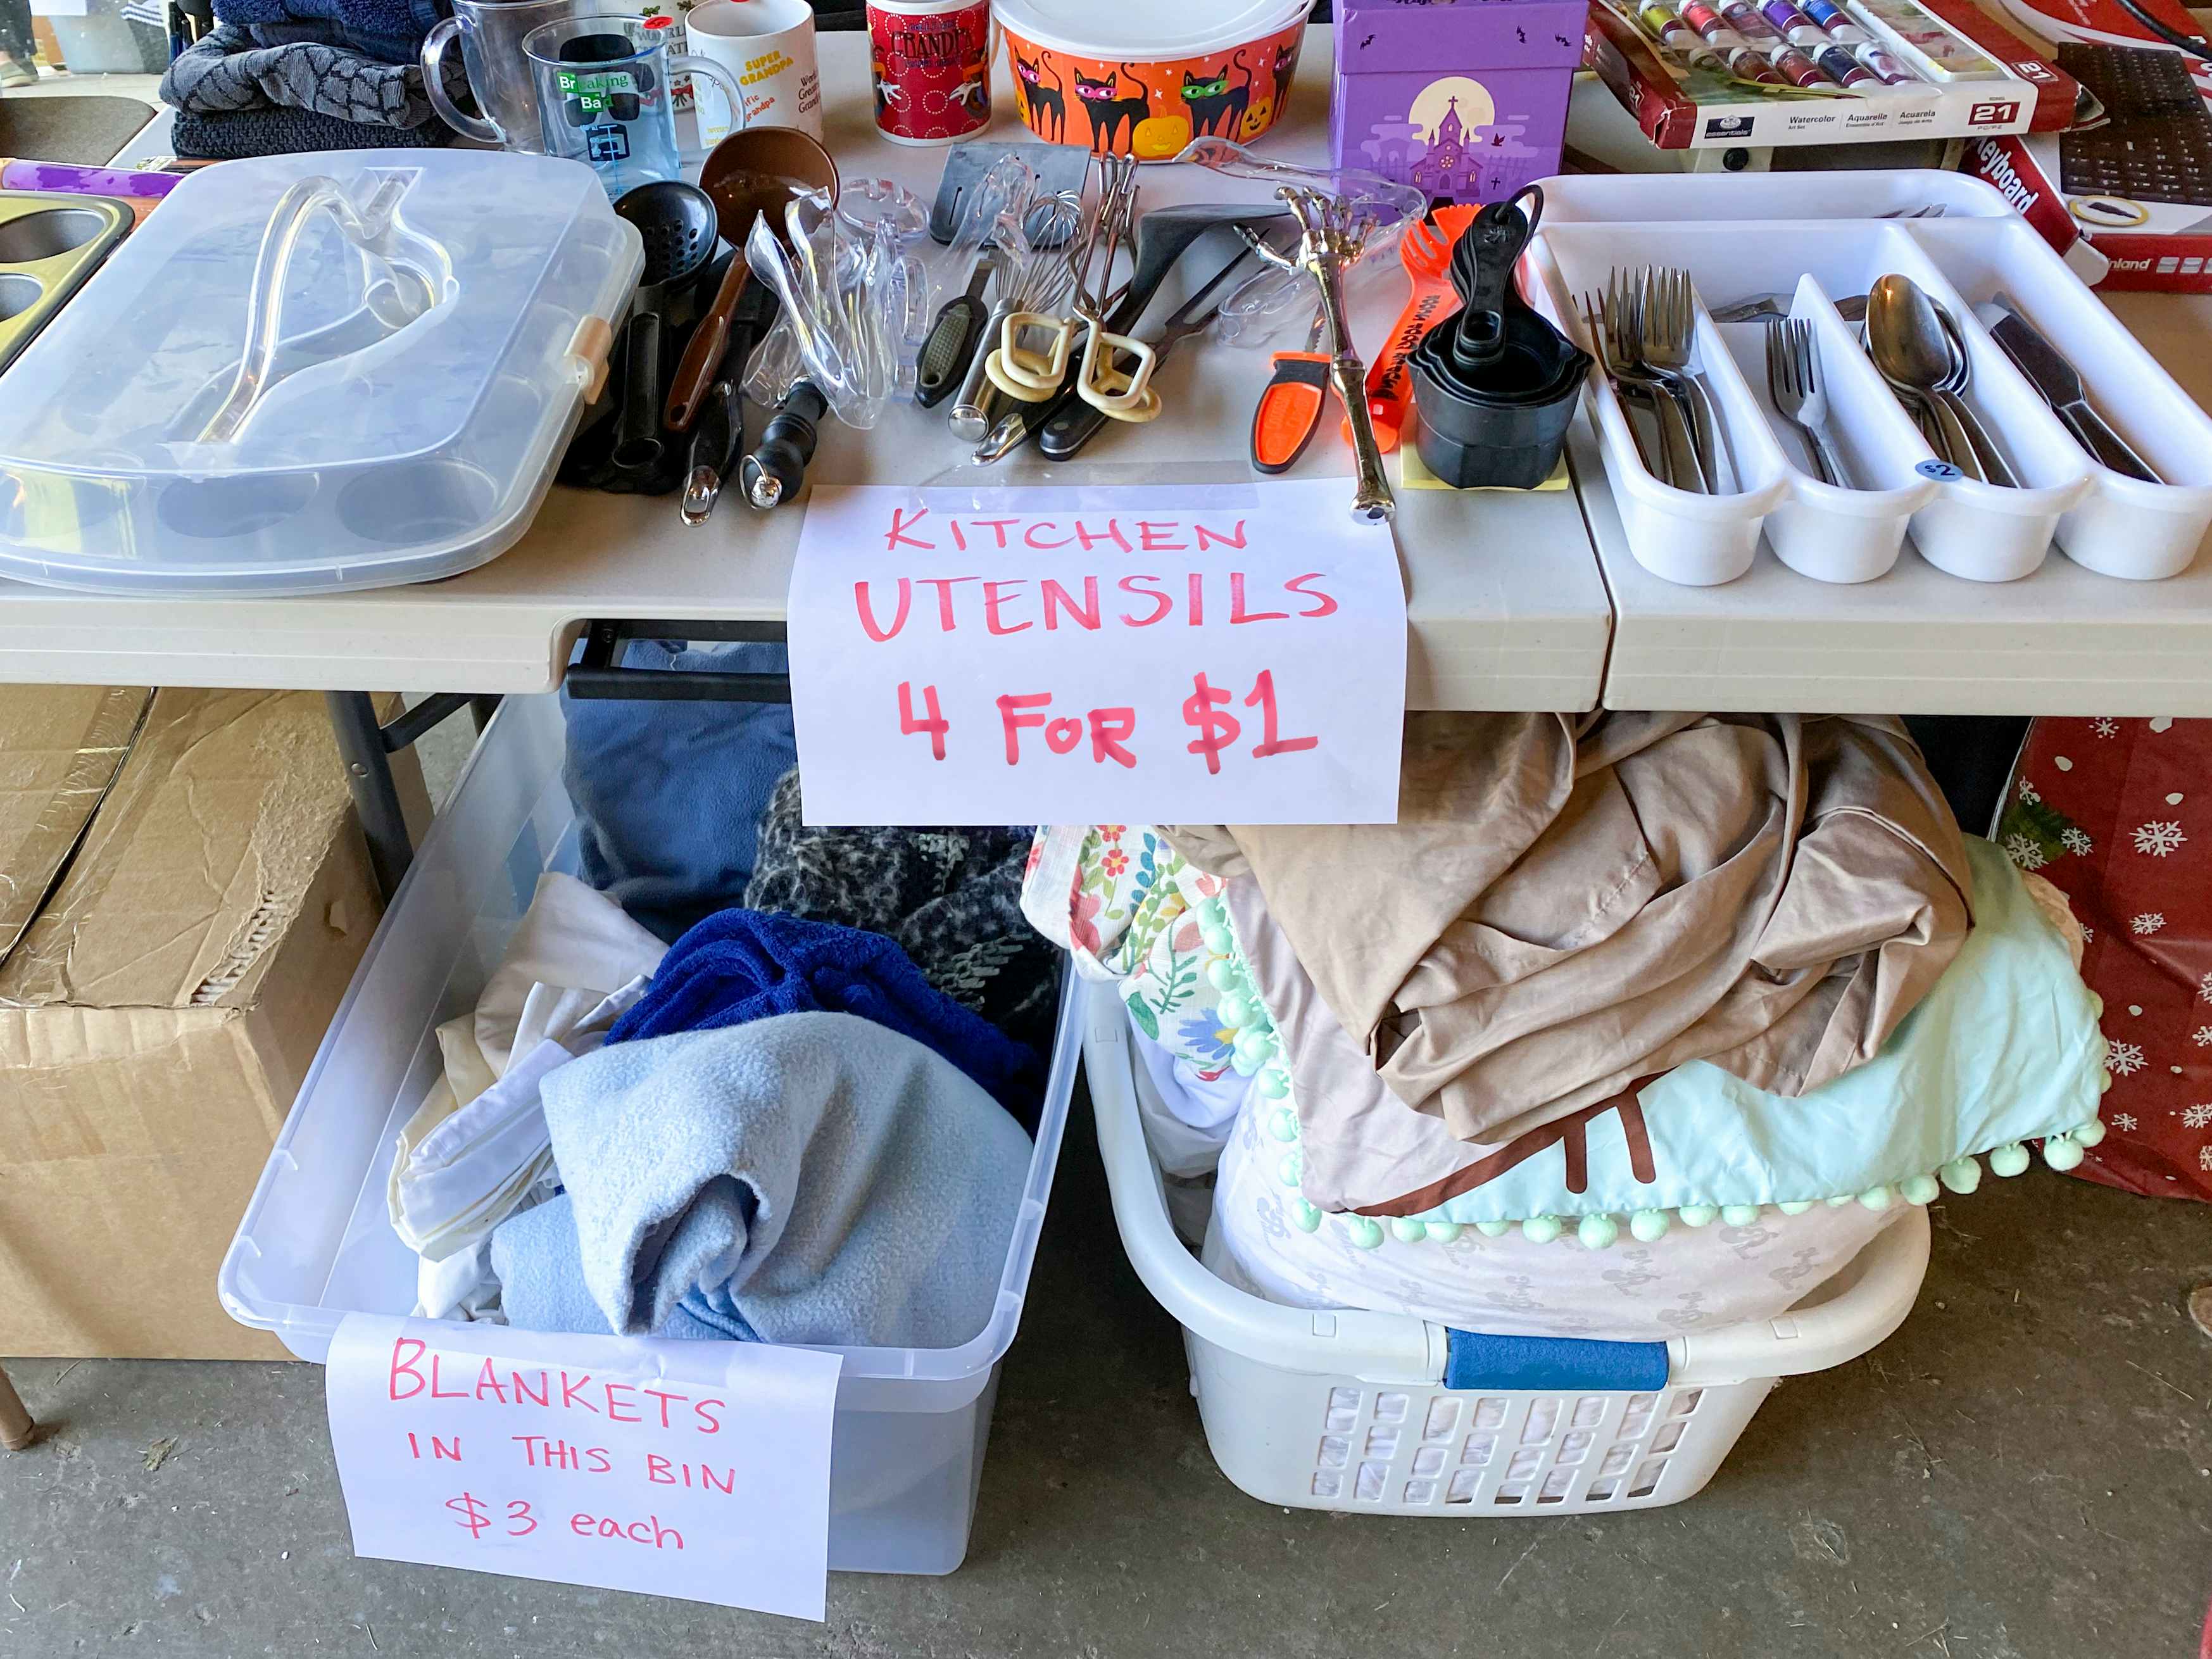 Tables of items for sale at a garage sale and signs advertising their prices